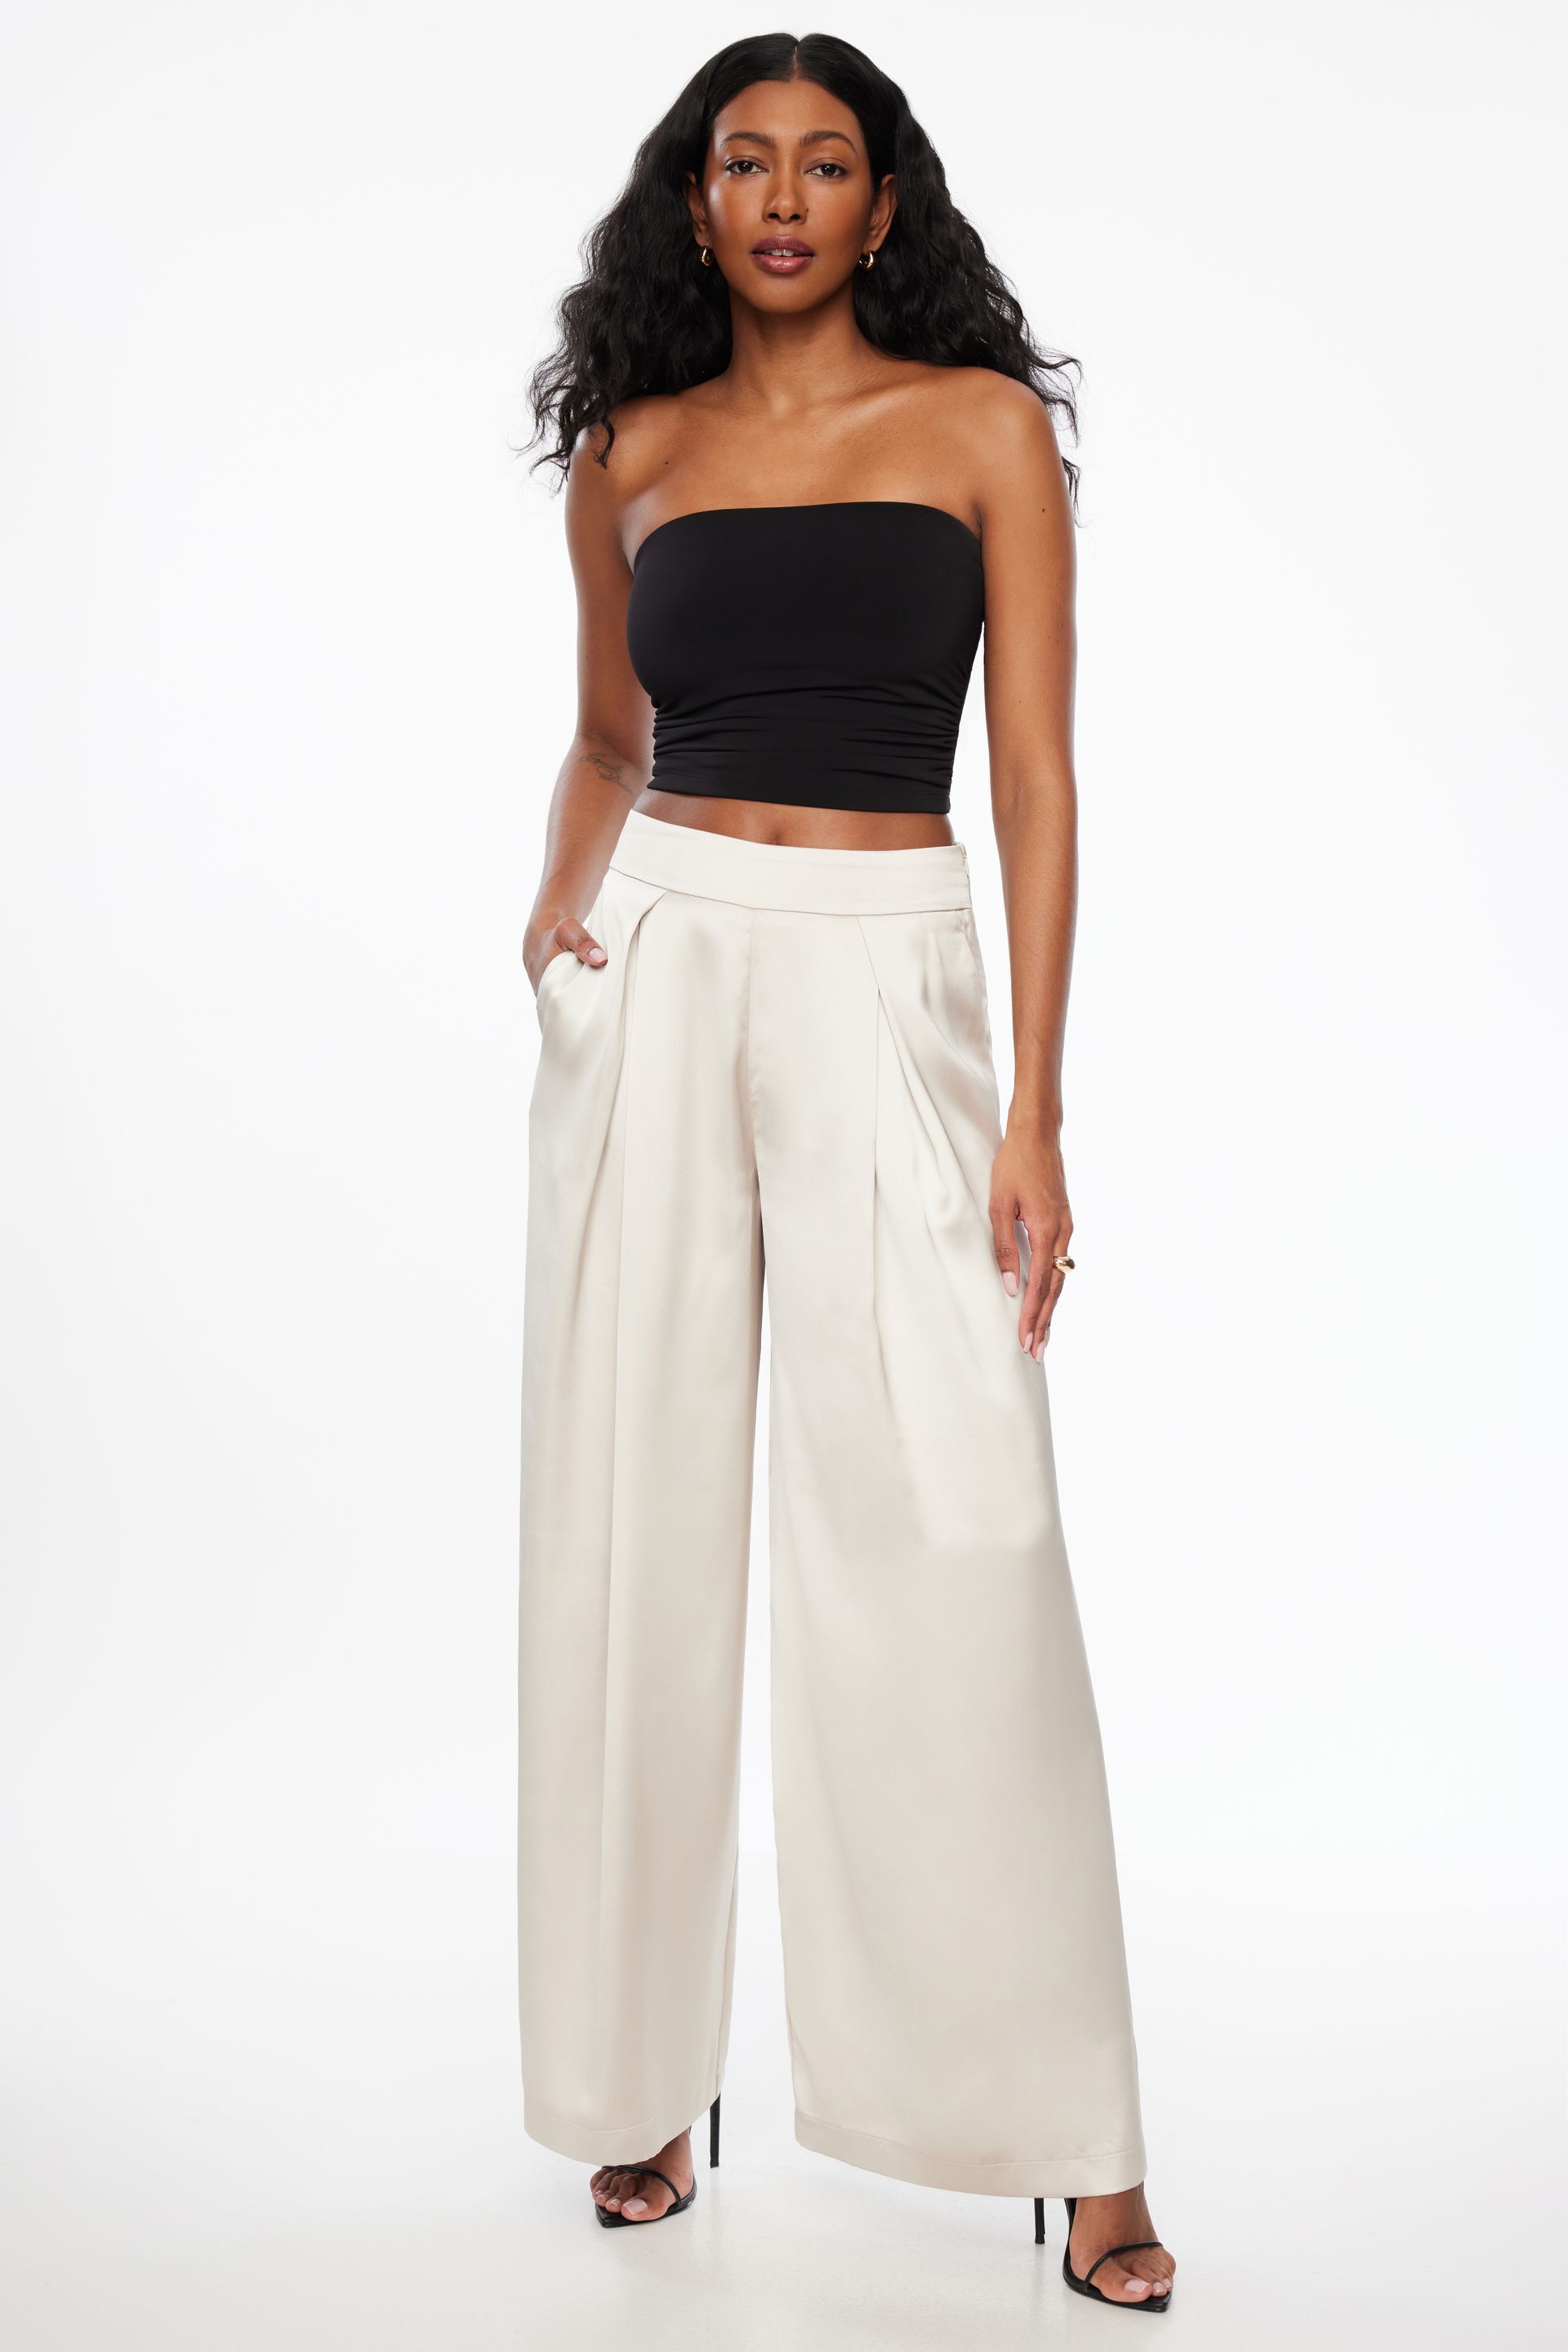 Buy SHOWOFF Women's High-Rise White Solid Straight Fit Parallel Trousers-LT-KN-132_White_28  at Amazon.in